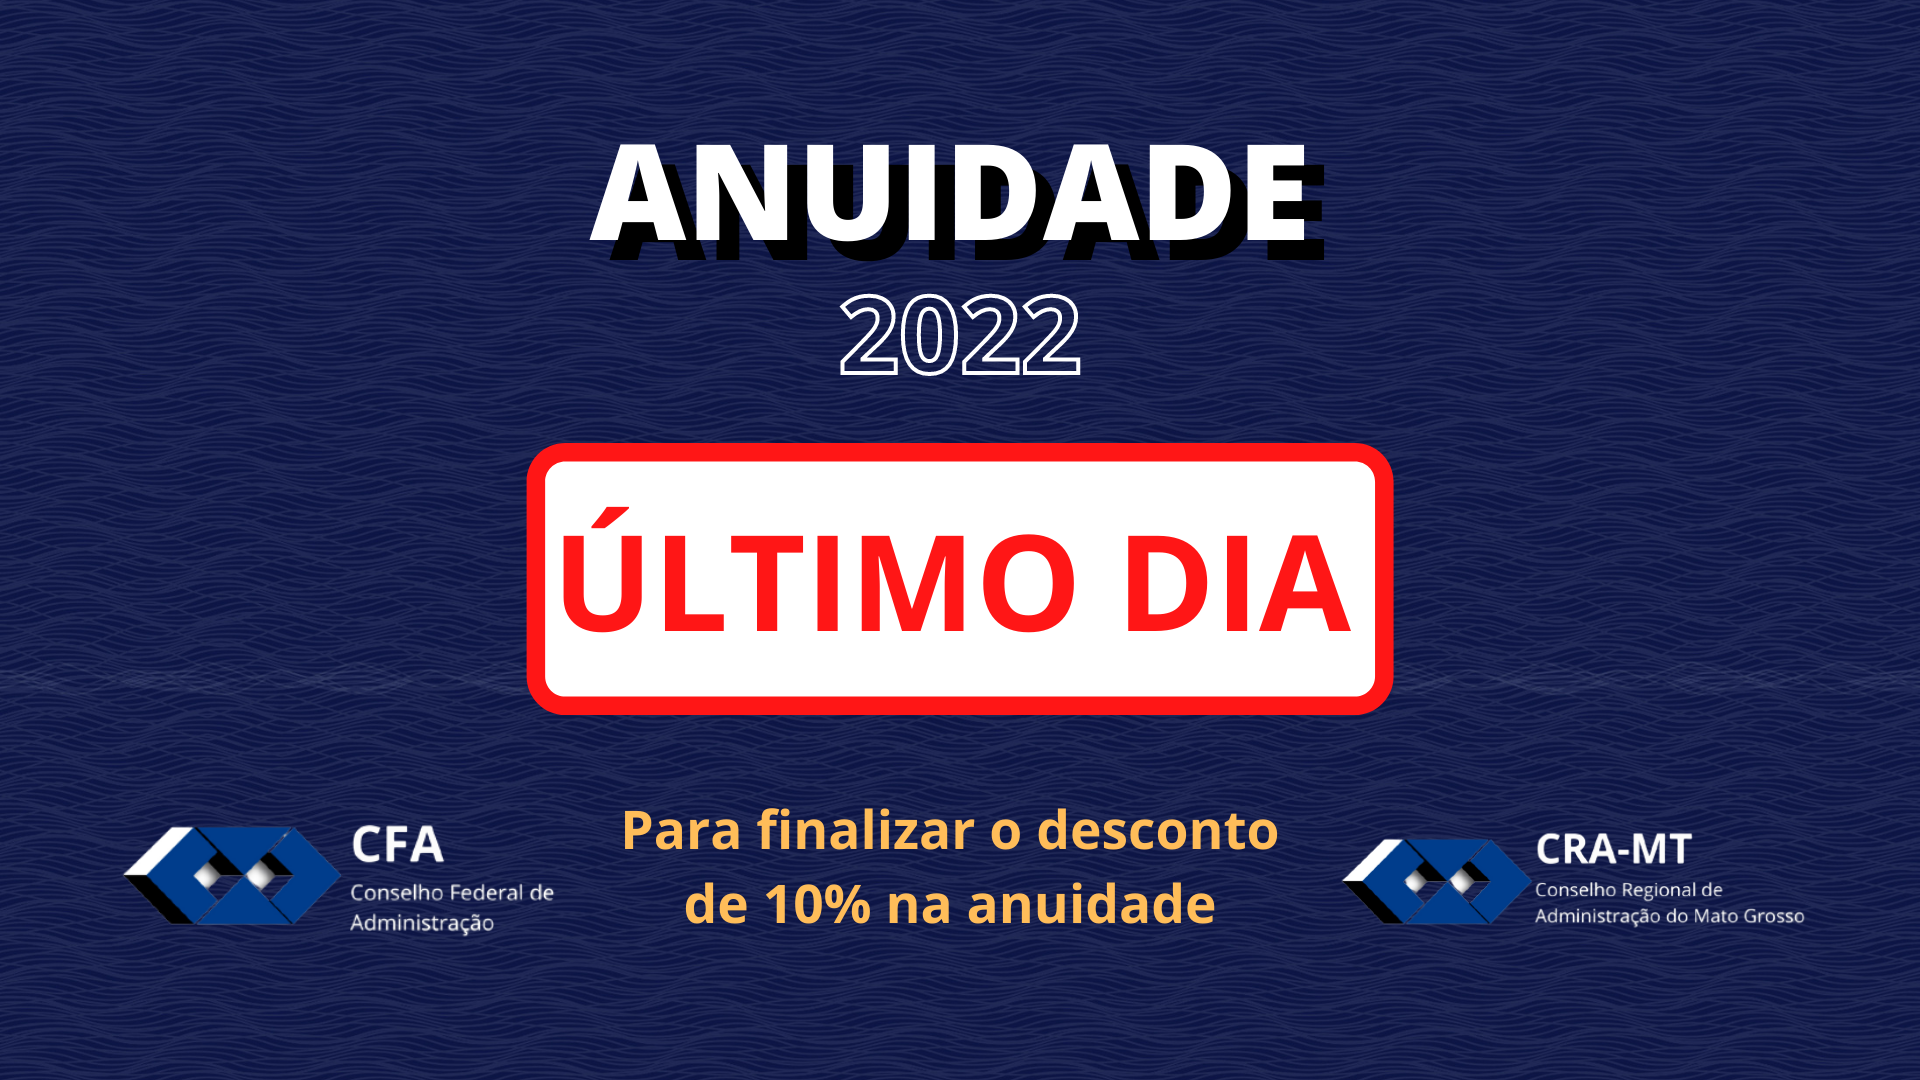 You are currently viewing ANUIDADE 2022